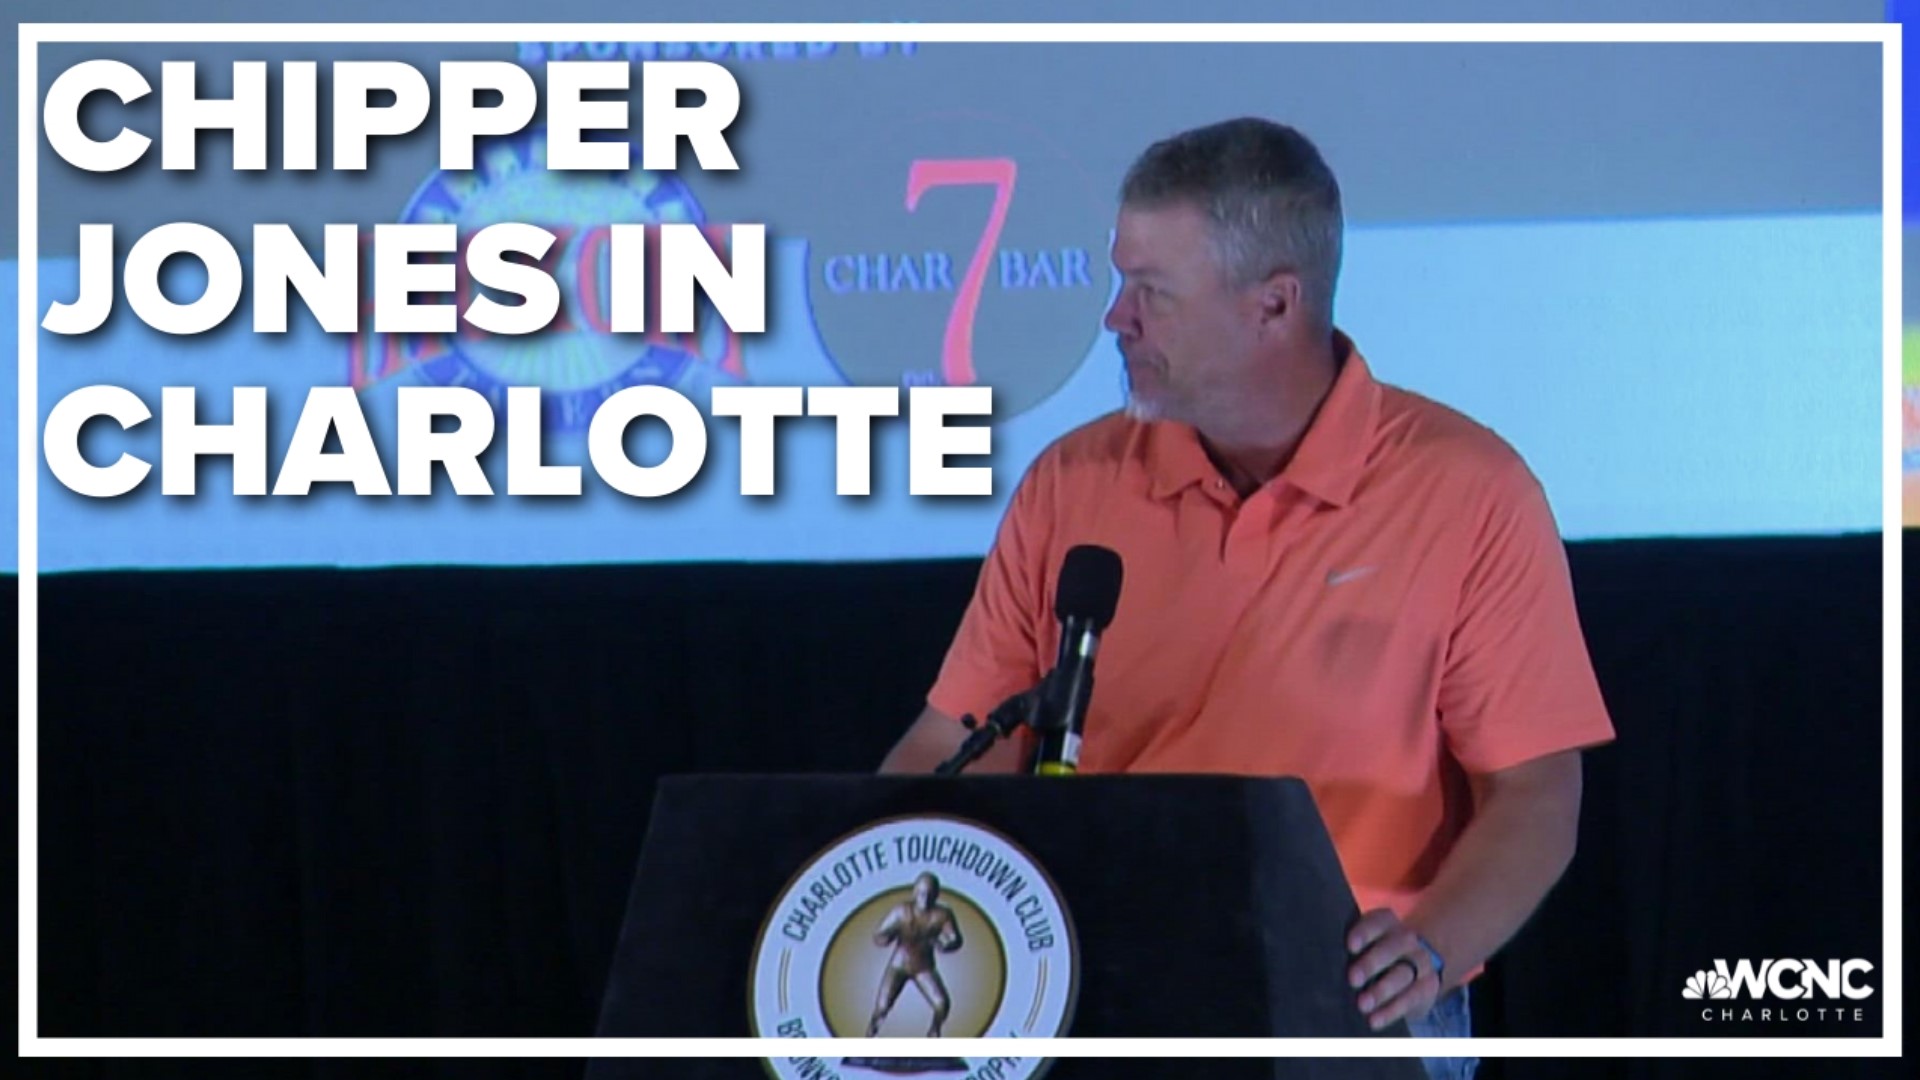 Braves legend Chipper Jones spoke in Uptown at the Charlotte Touchdown Club luncheon Wednesday.